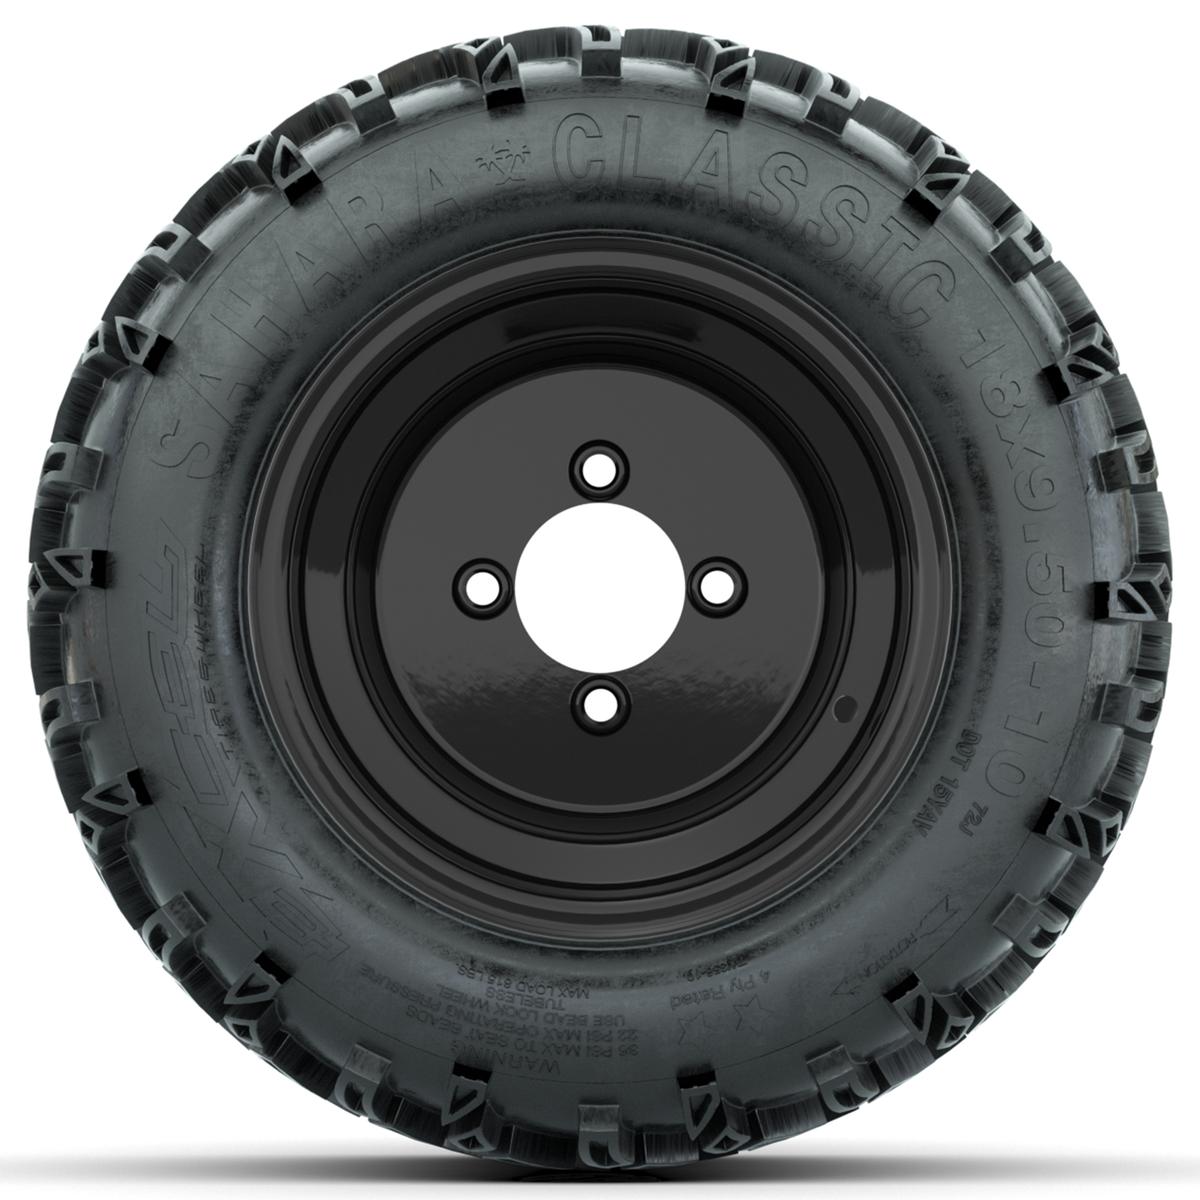 Set of (4) 10 in Black Steel Offset Wheels with 18x9.5-10 Sahara Classic All Terrain Tires